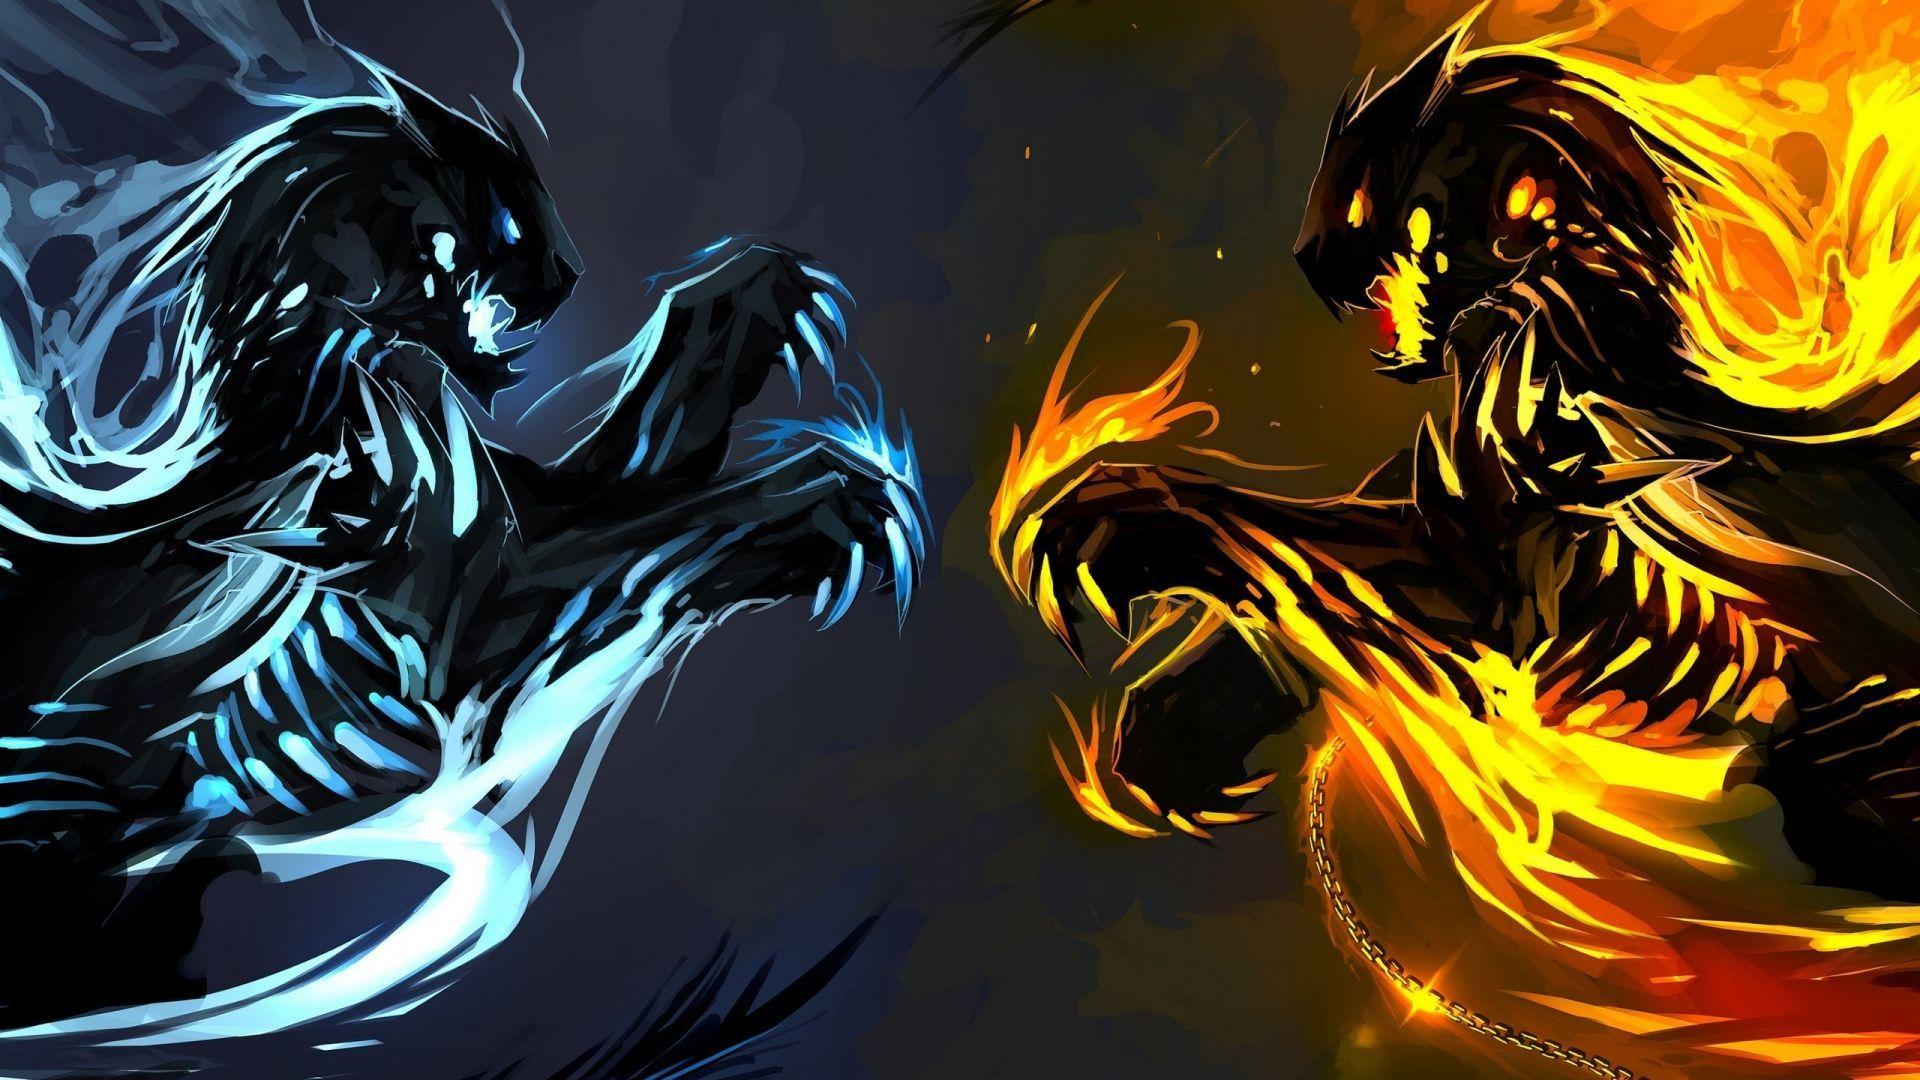 Ice and Fire Dragons wallpaper .com